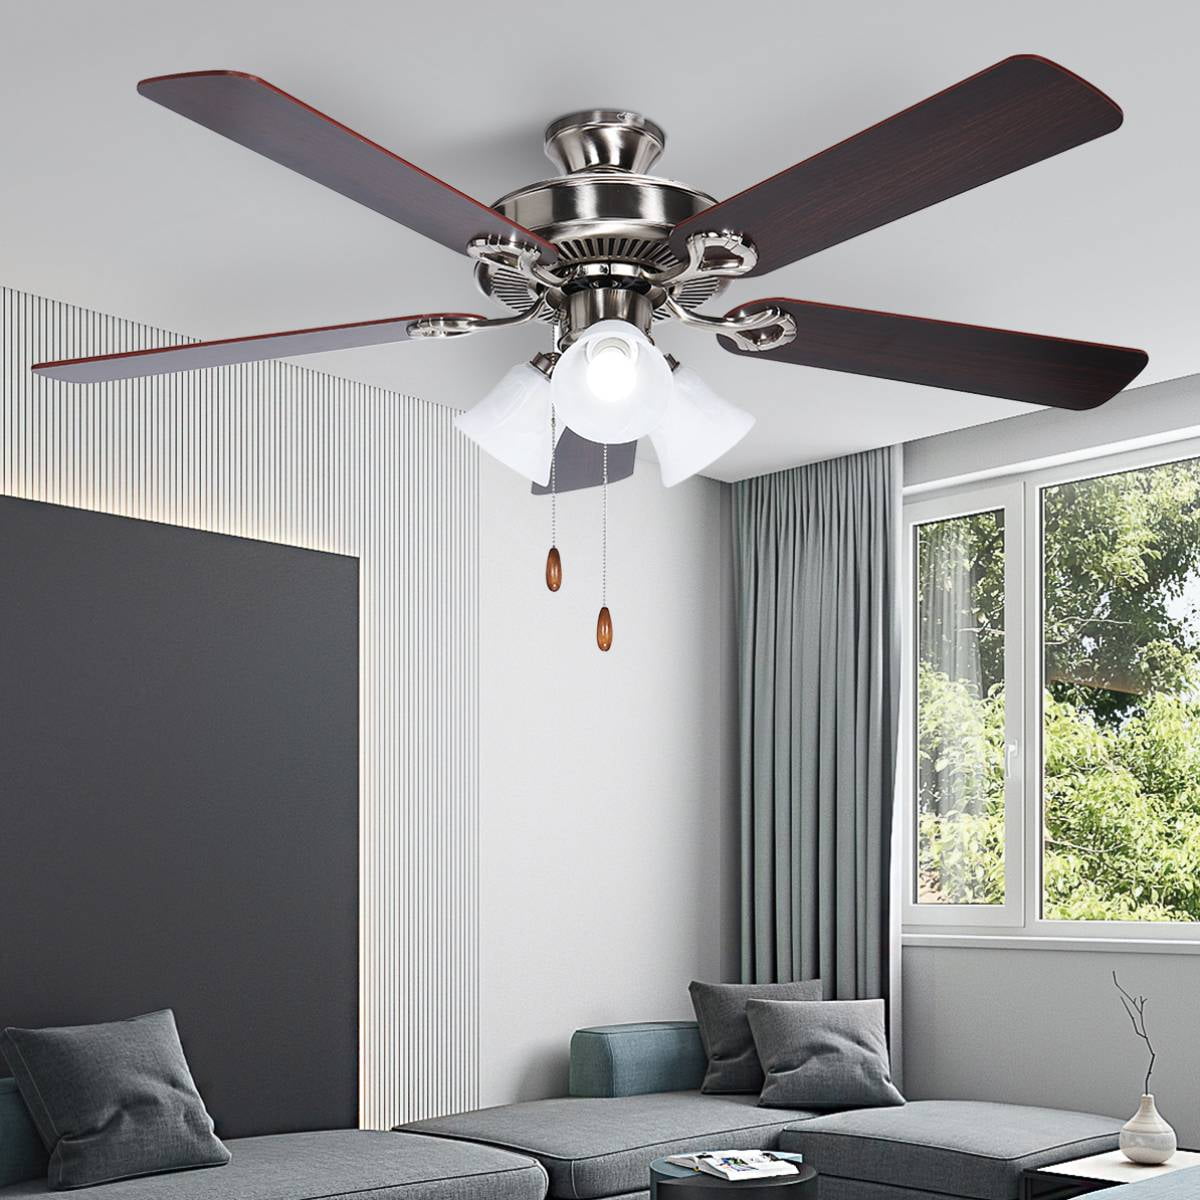 Ceiling Fan 52 in LED Light Kit Indoor Low Profile Design 5 Blades Home NEW 